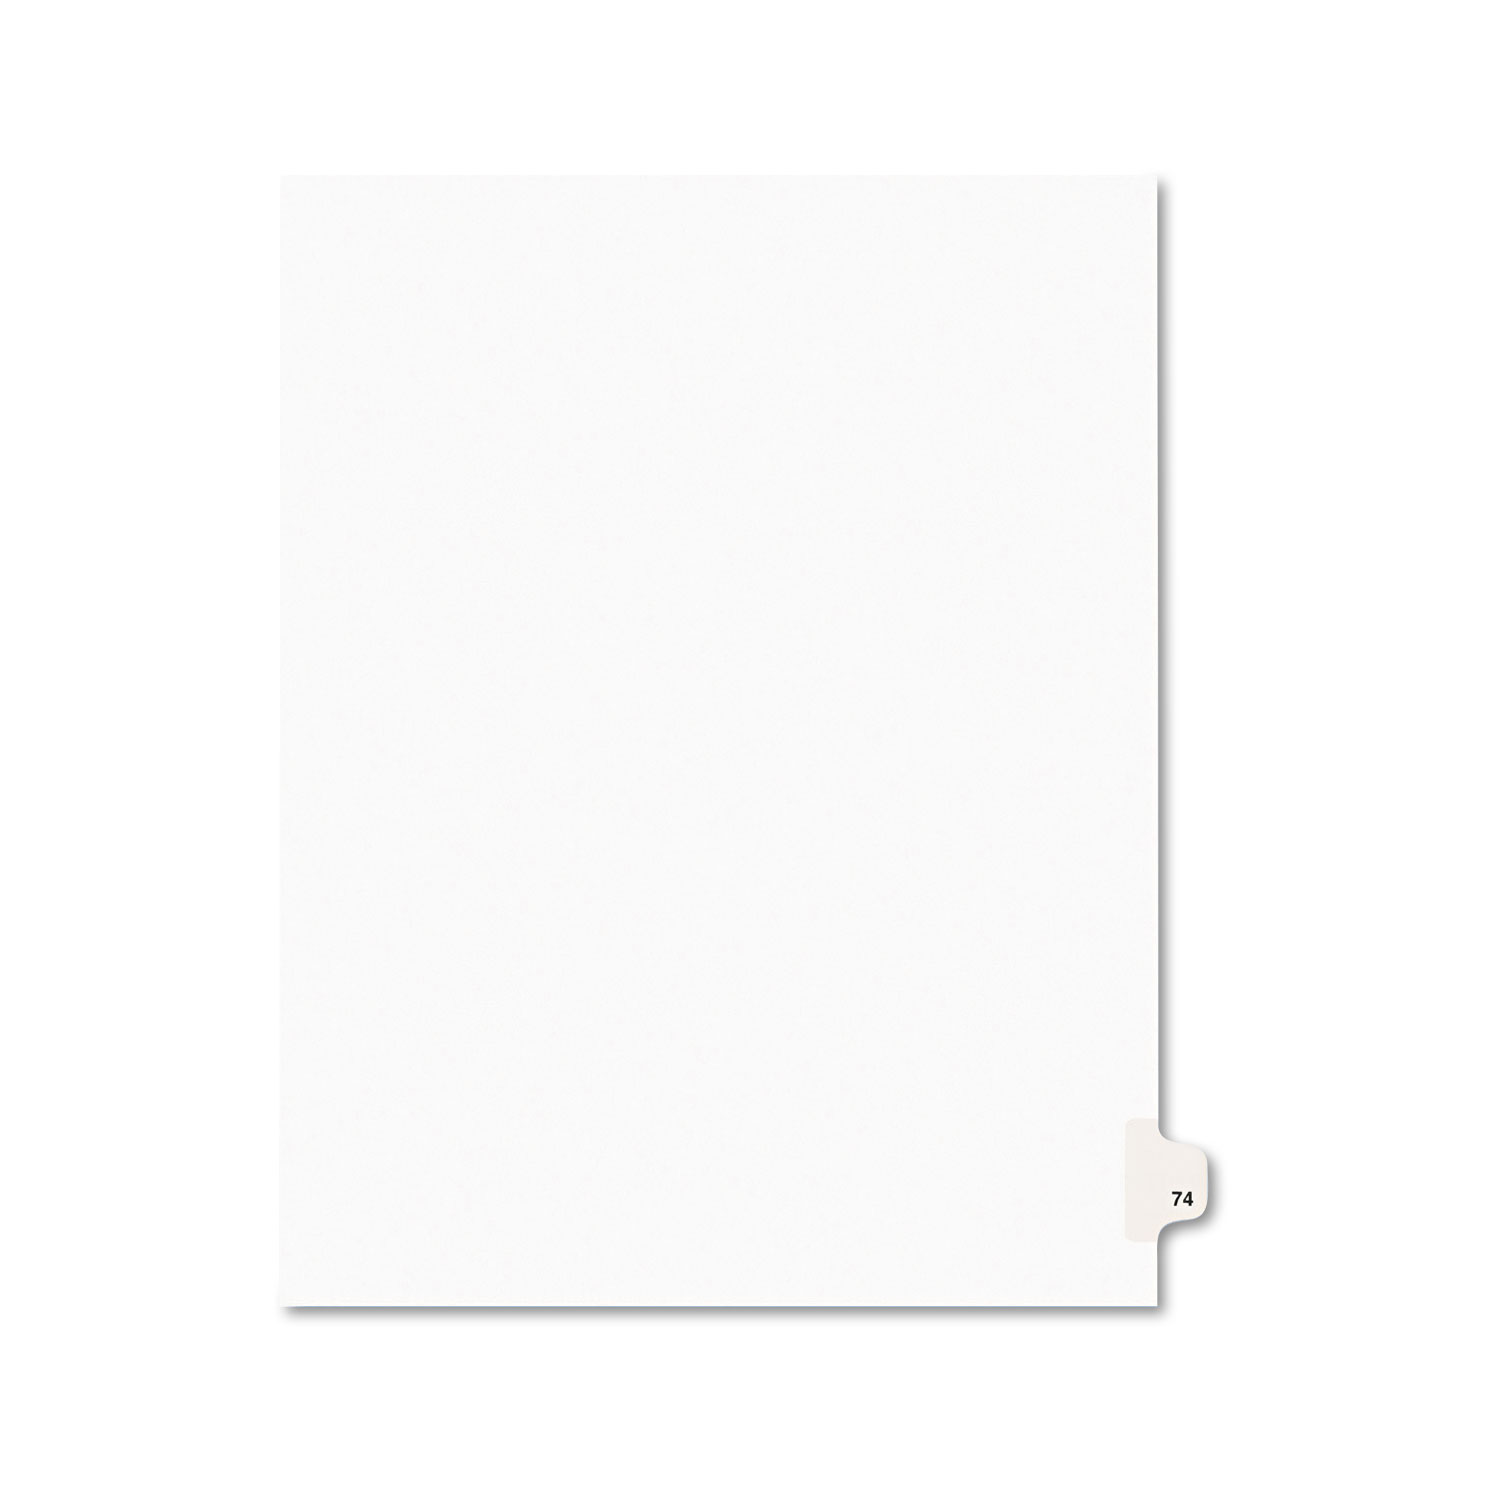  Avery 01074 Preprinted Legal Exhibit Side Tab Index Dividers, Avery Style, 10-Tab, 74, 11 x 8.5, White, 25/Pack (AVE01074) 